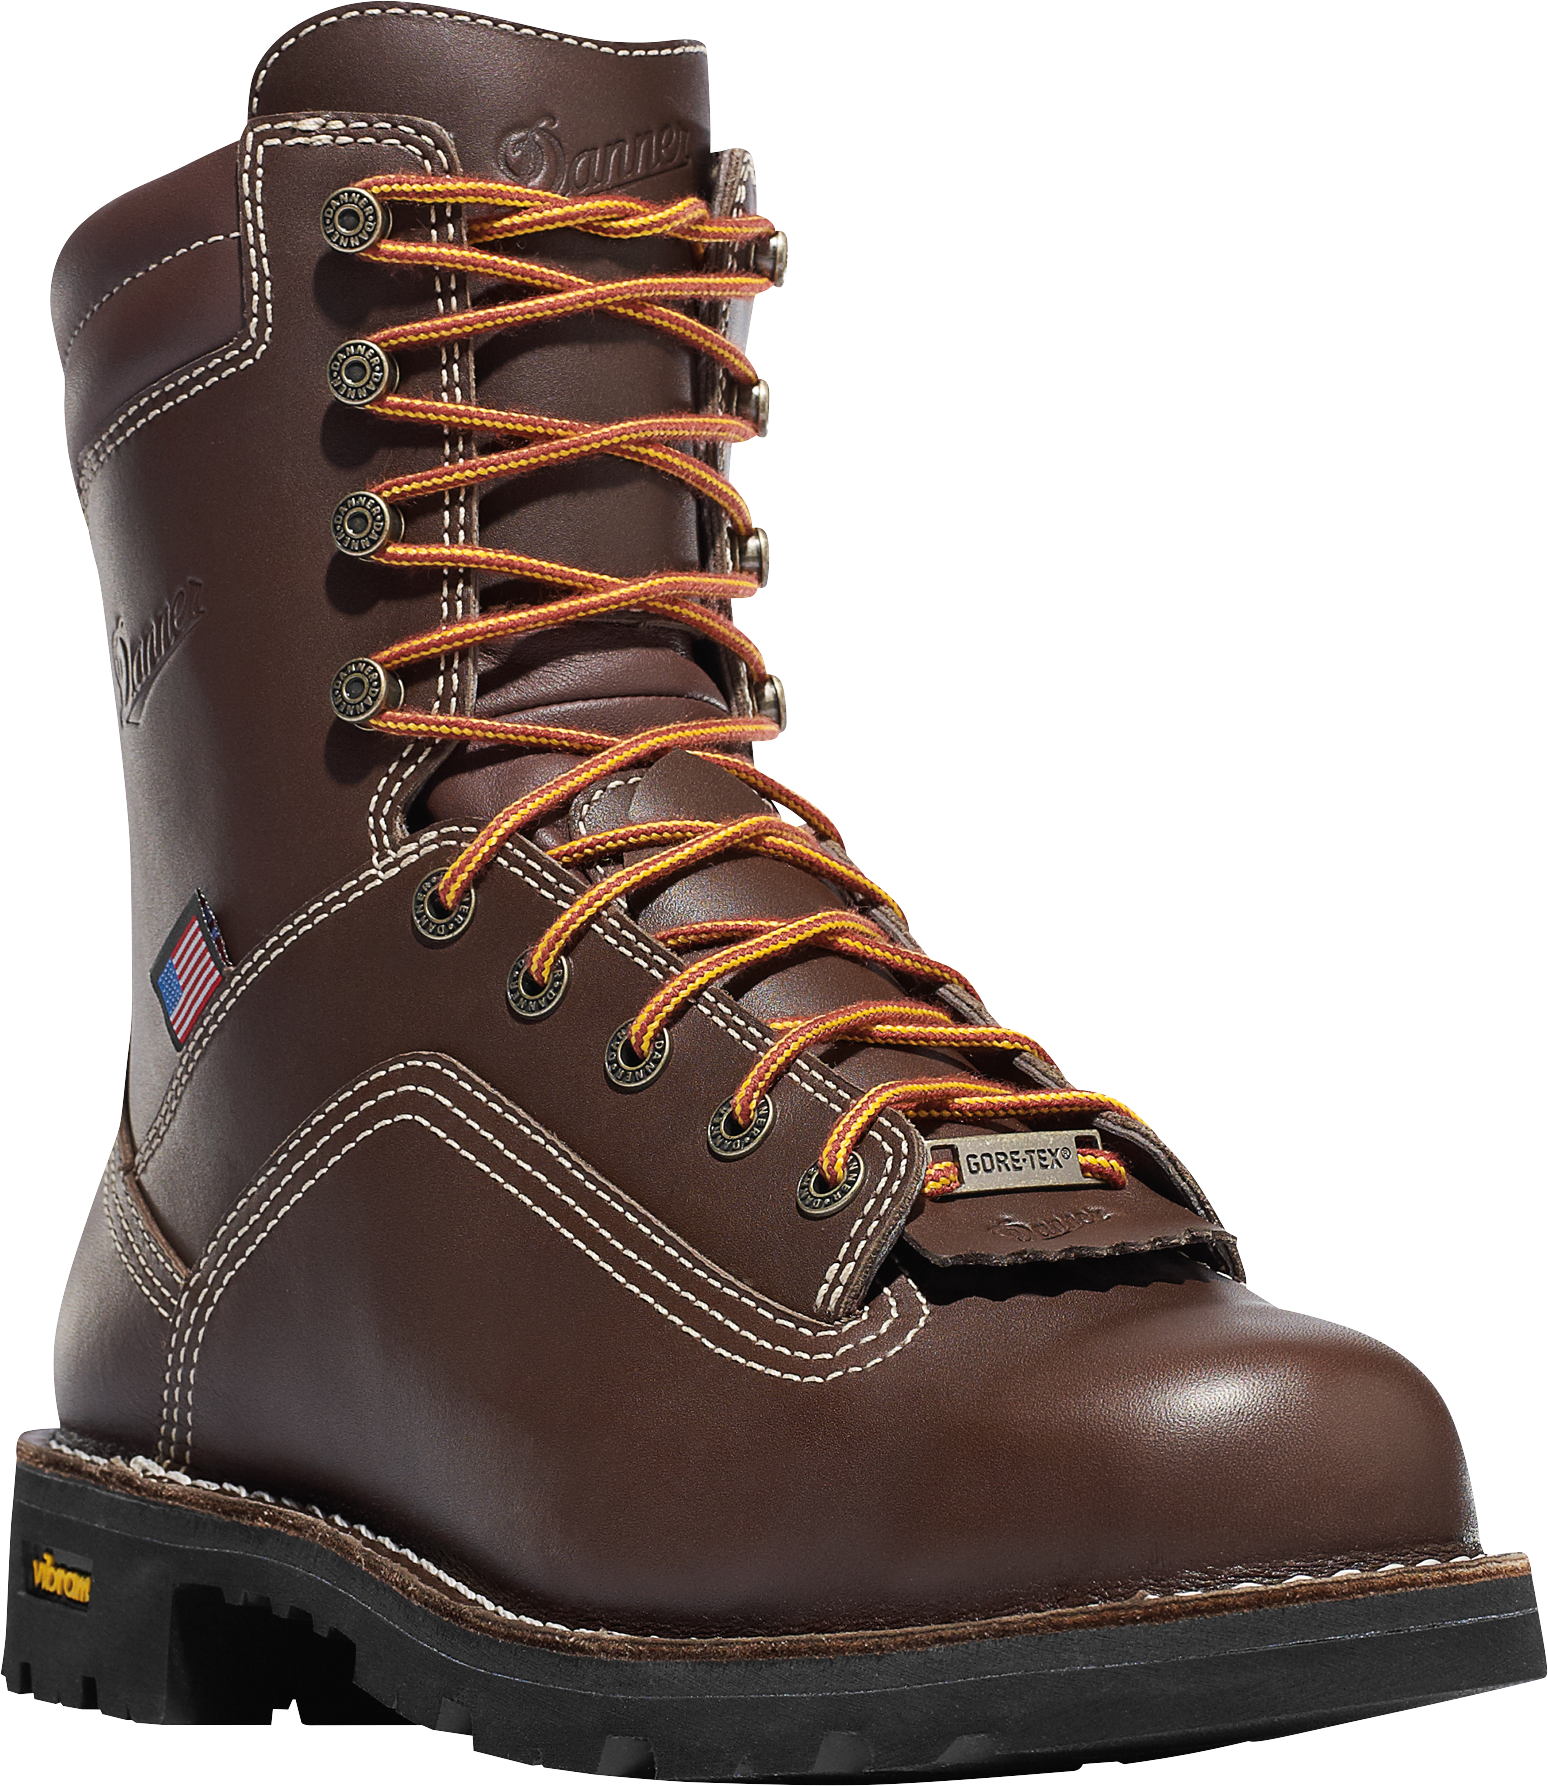 Danner Quarry USA Brown GORE-TEX Alloy Toe Work Boots for Men - Brown - 7W